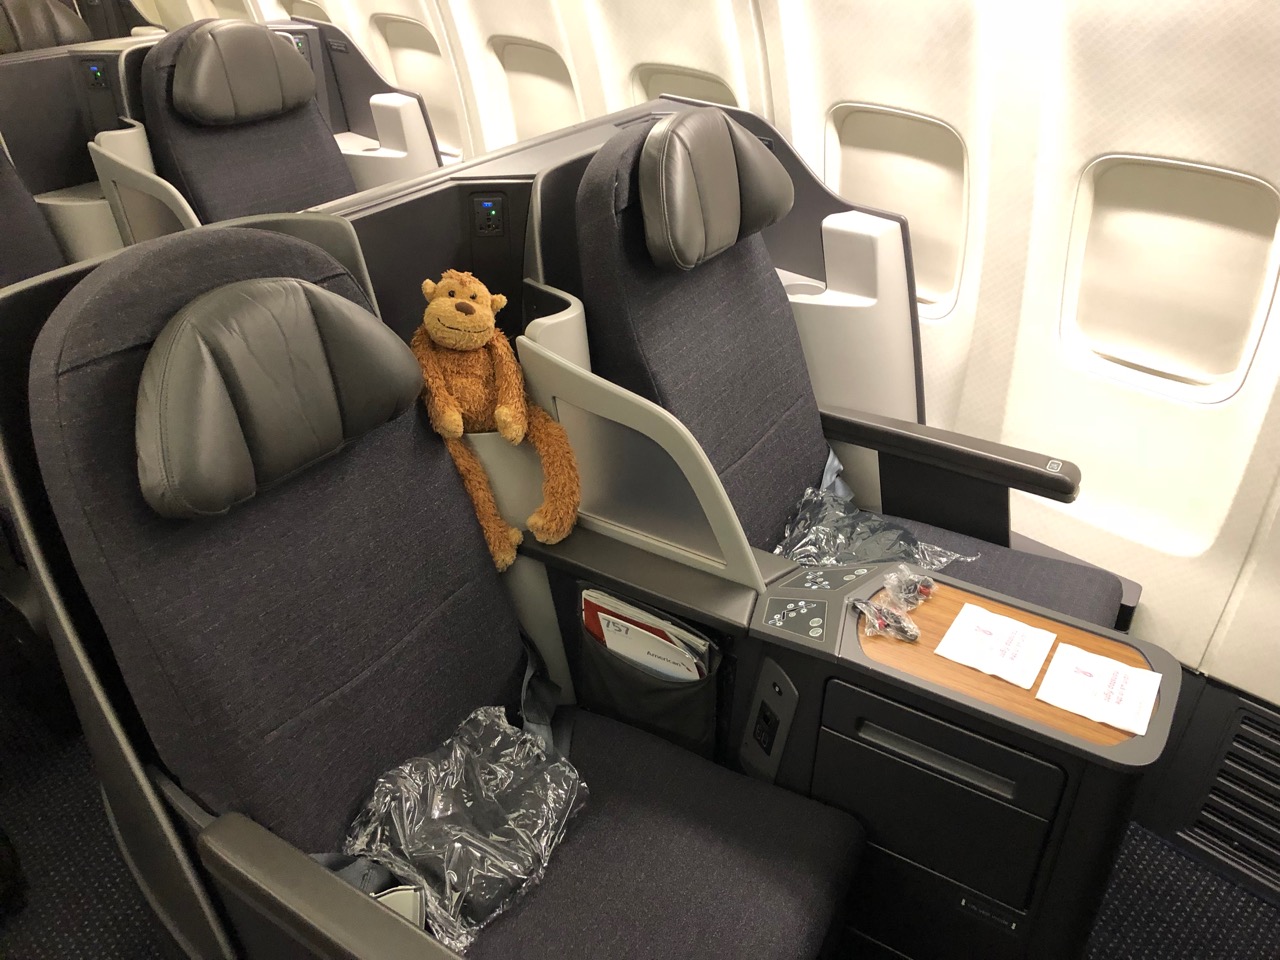 a stuffed animal on the seats of an airplane